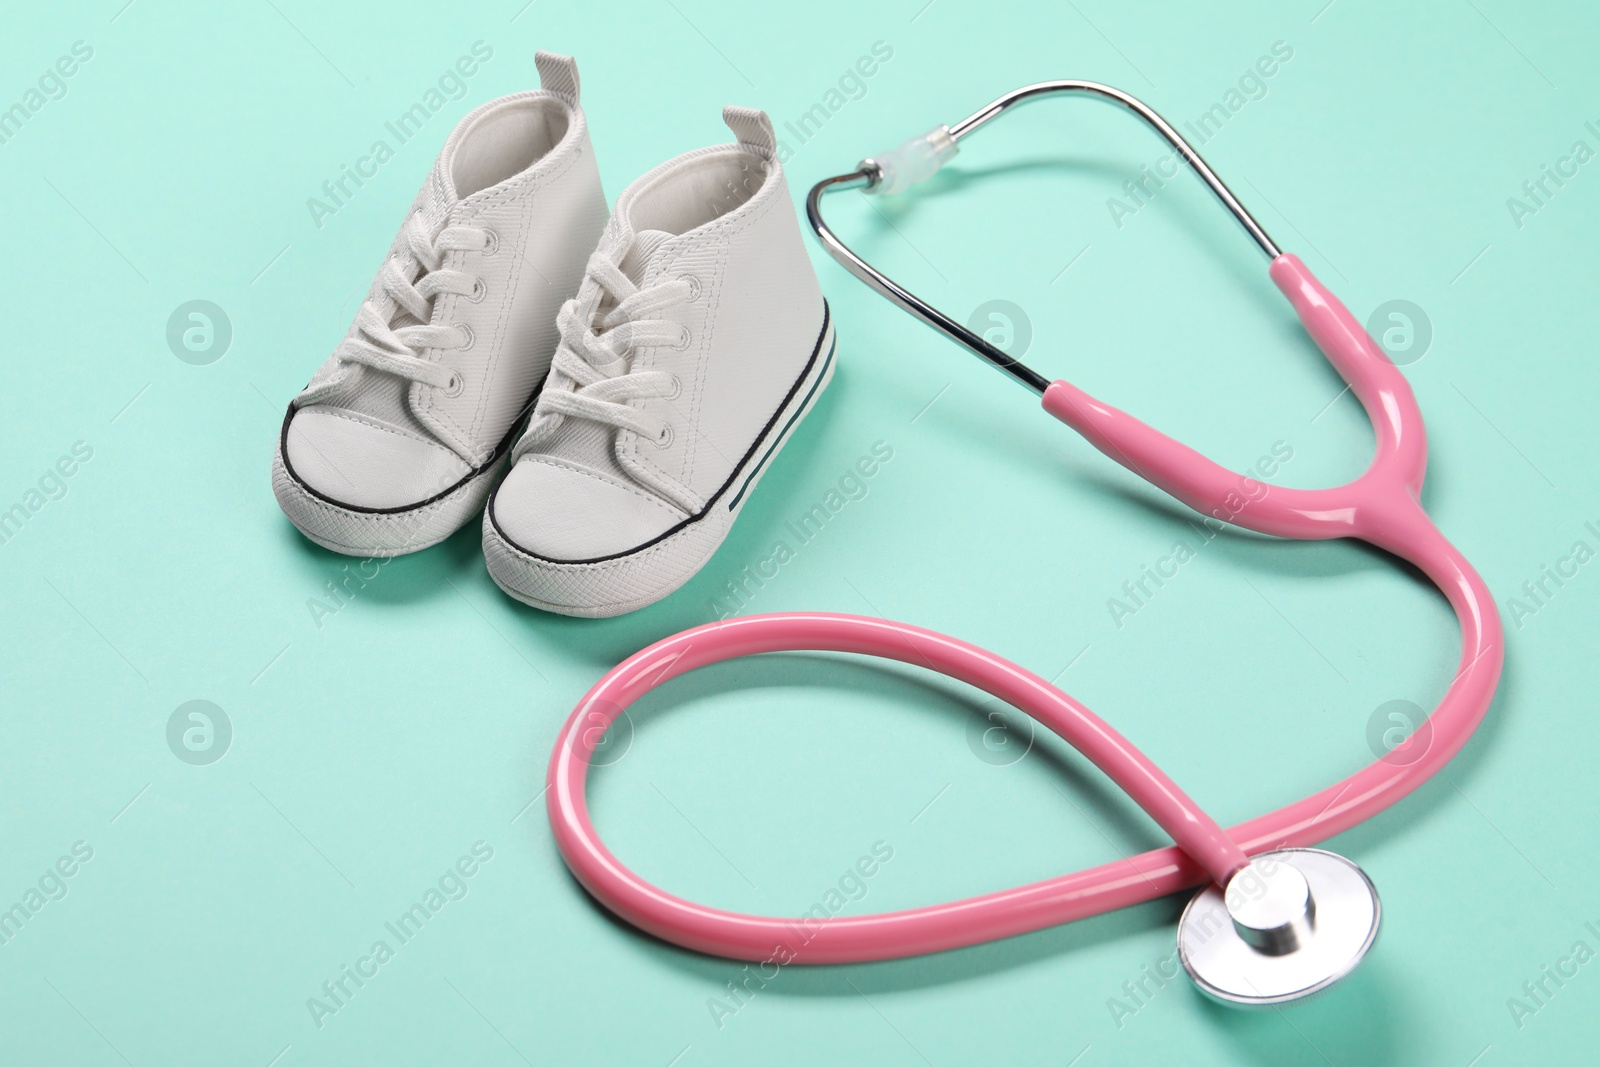 Photo of Stethoscope and kid's sneakers on turquoise background